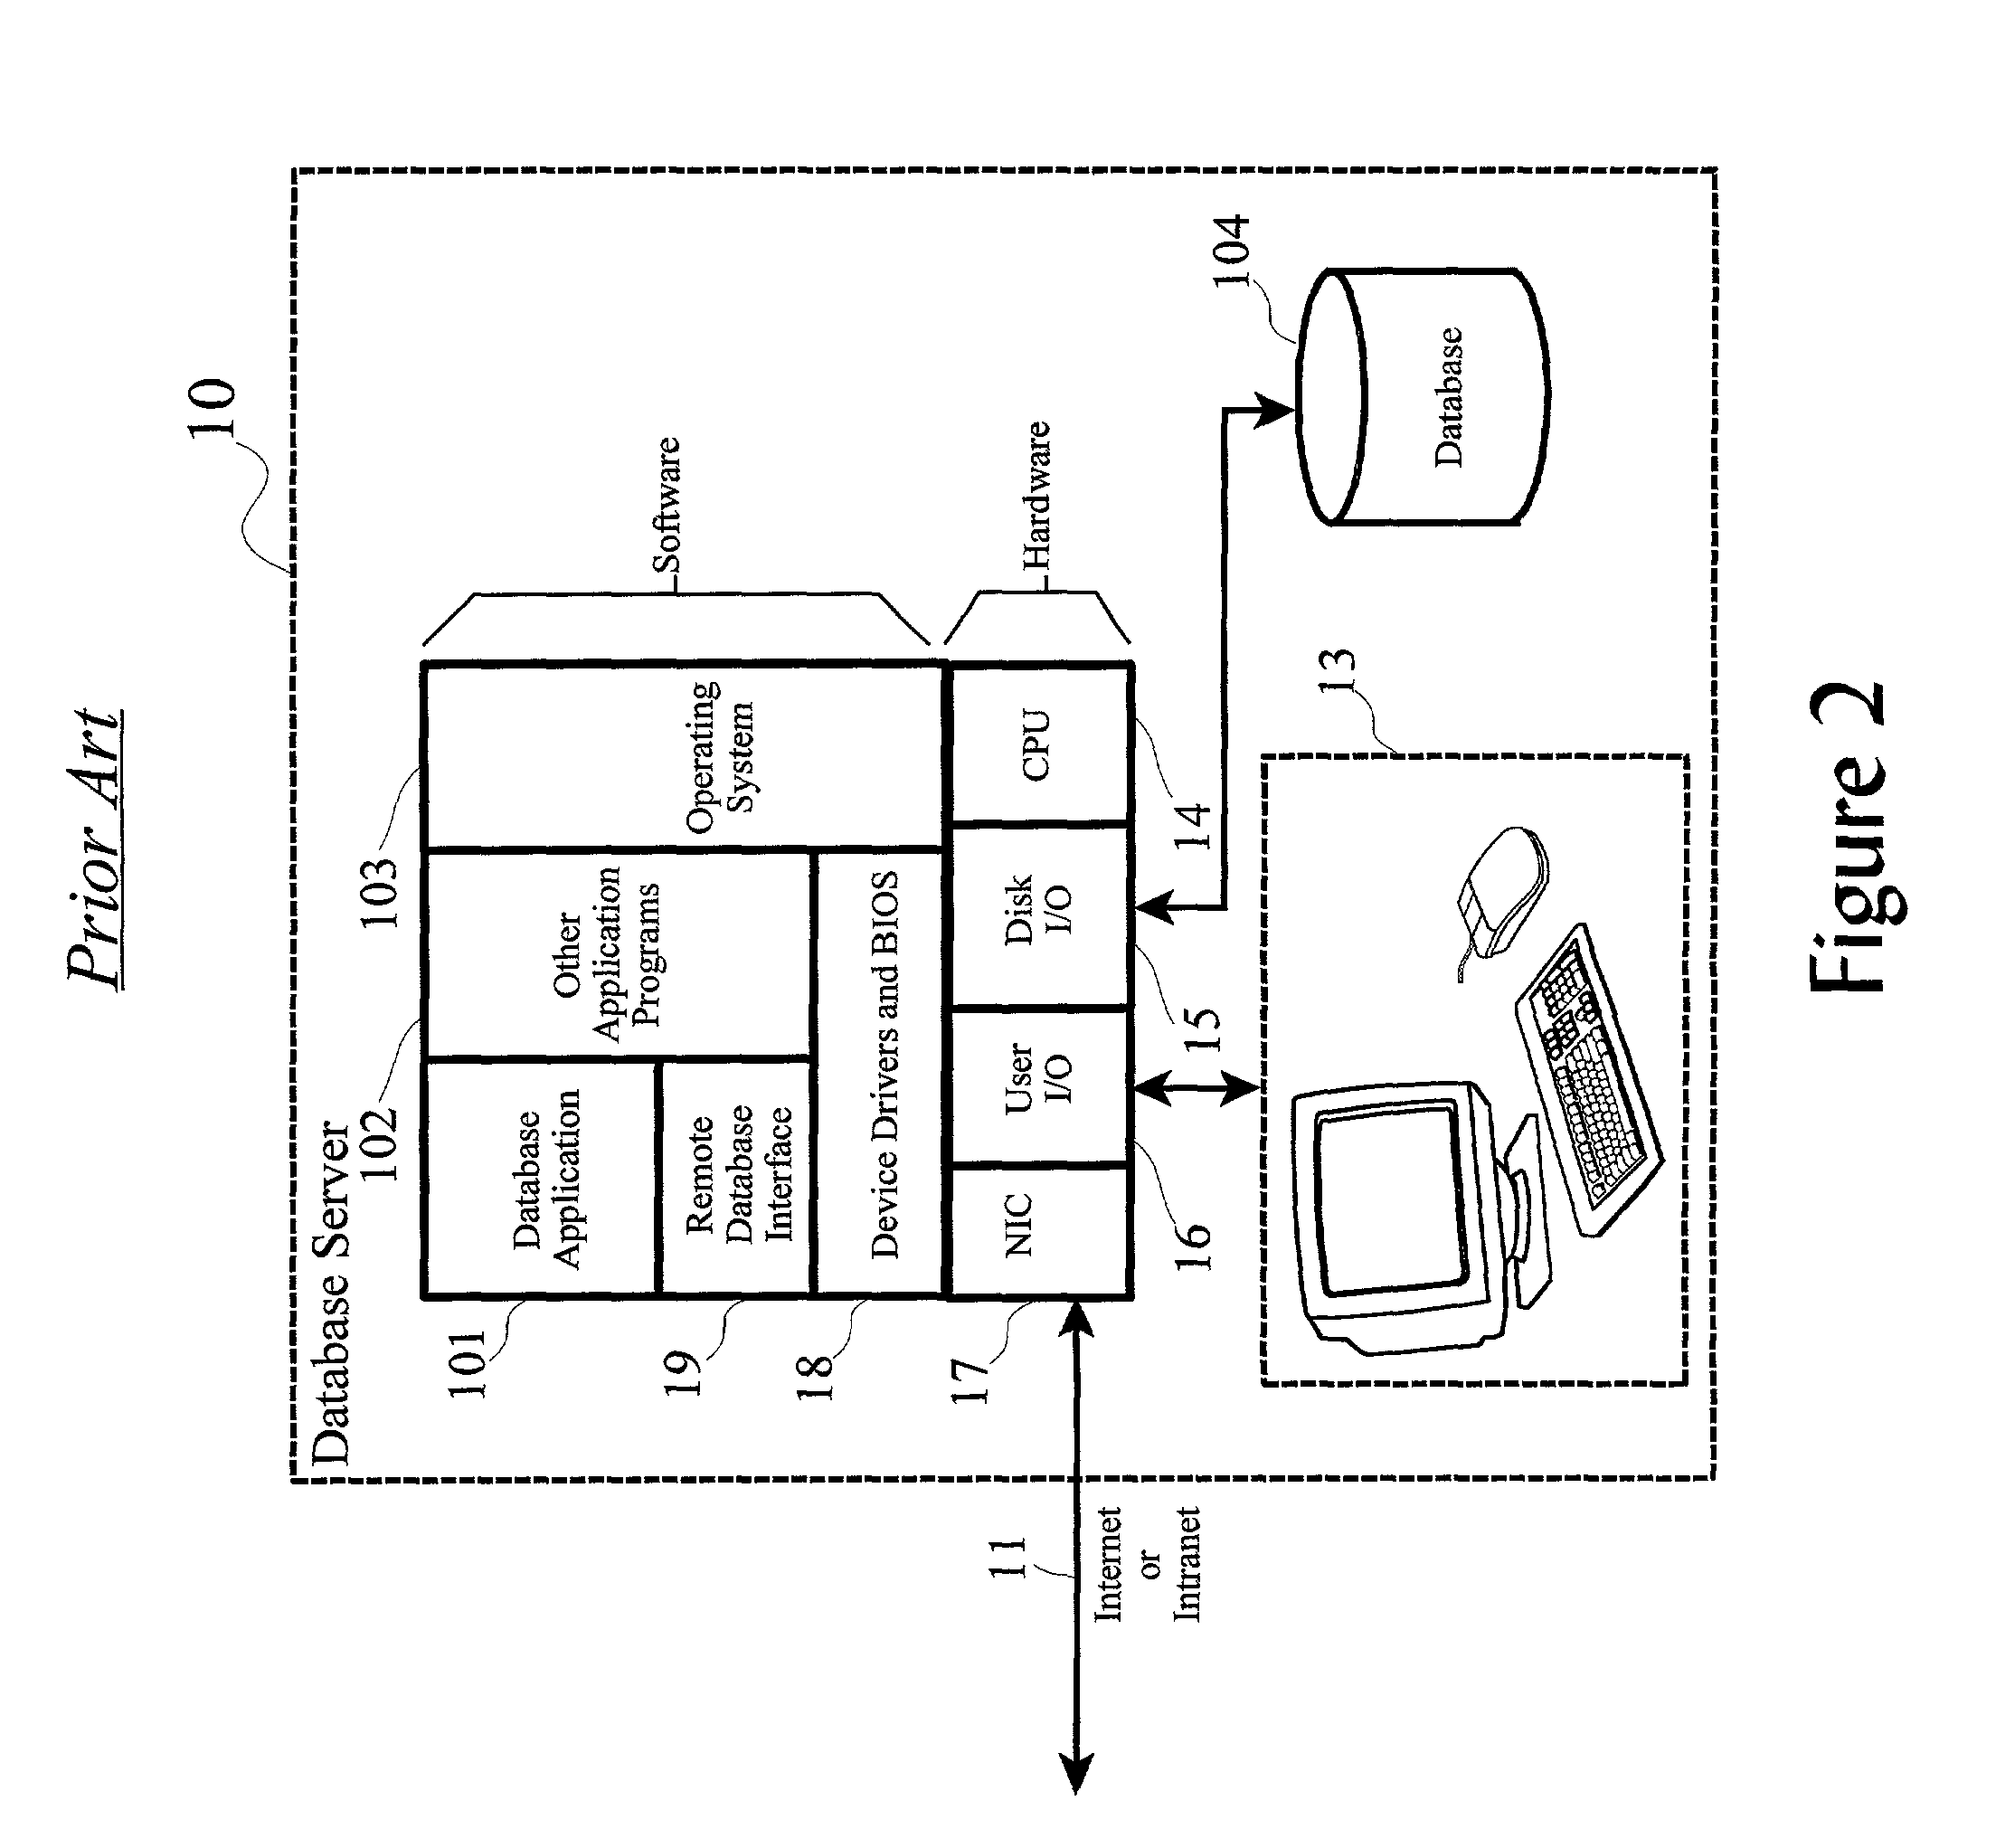 Client account and information management system and method